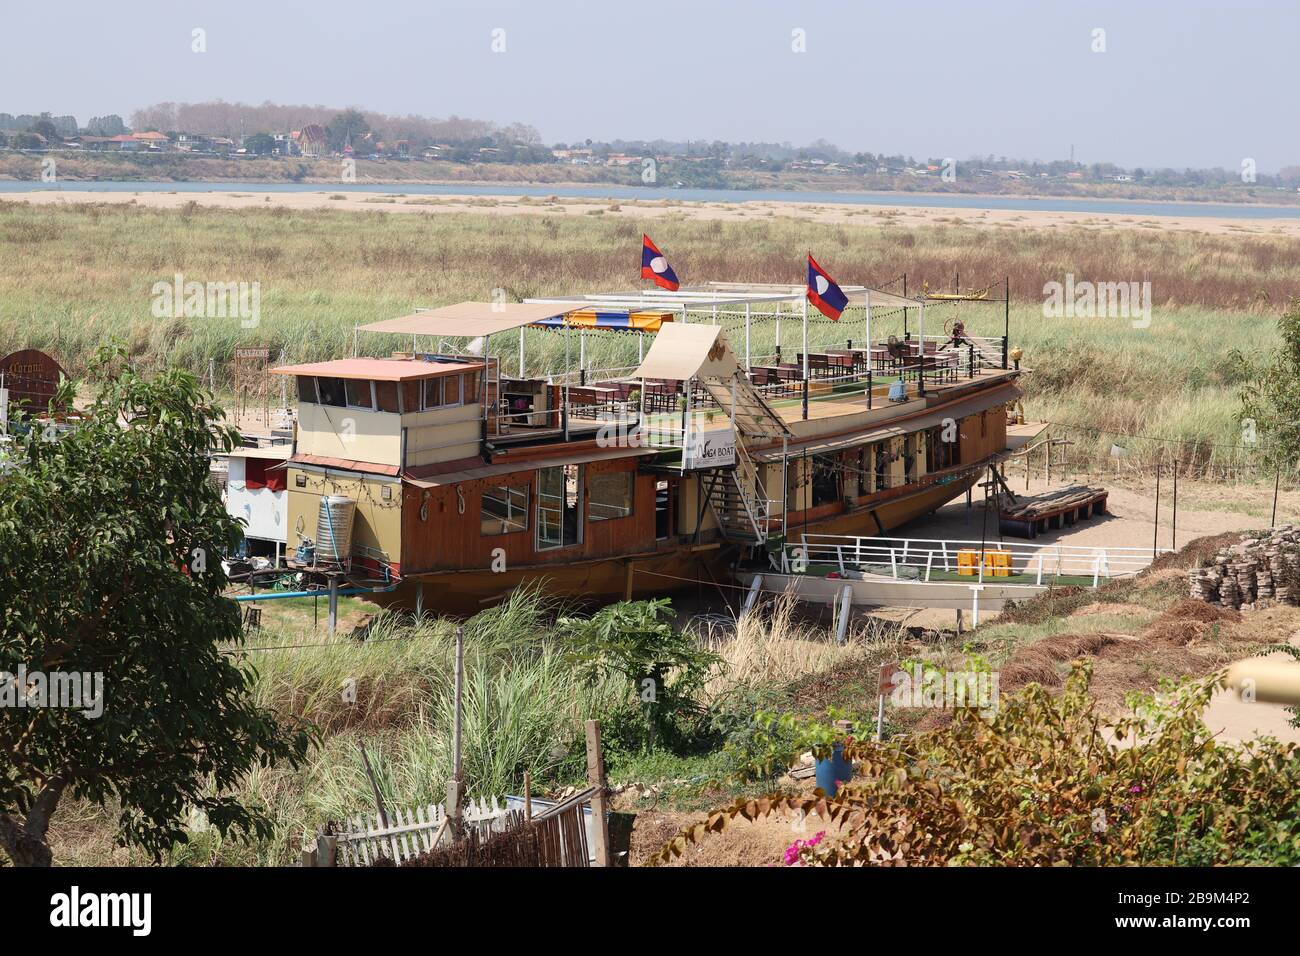 A JUNK BOAT MOORED NEAR THE MEKONG RIVER ,TURNED INTO A RESTAURANT IN VIENTIANE LAOS. Stock Photo